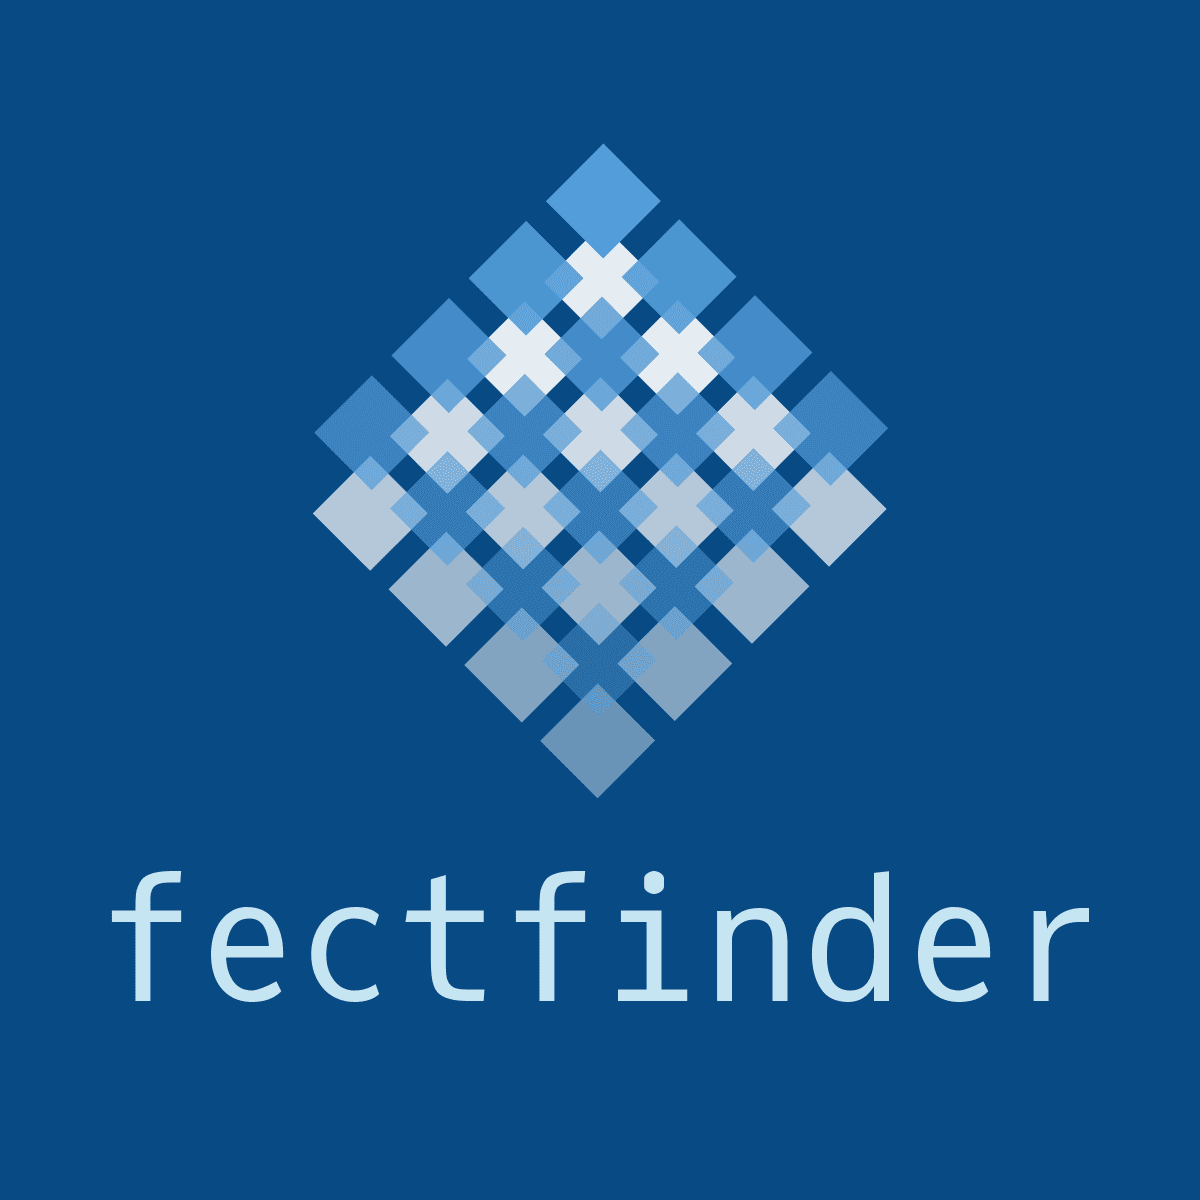 Fectfinder - The Latest FEC-Detection Tool Utilizing Best-In-Class Know Your Customer Processes And State-Of-The-Art AI